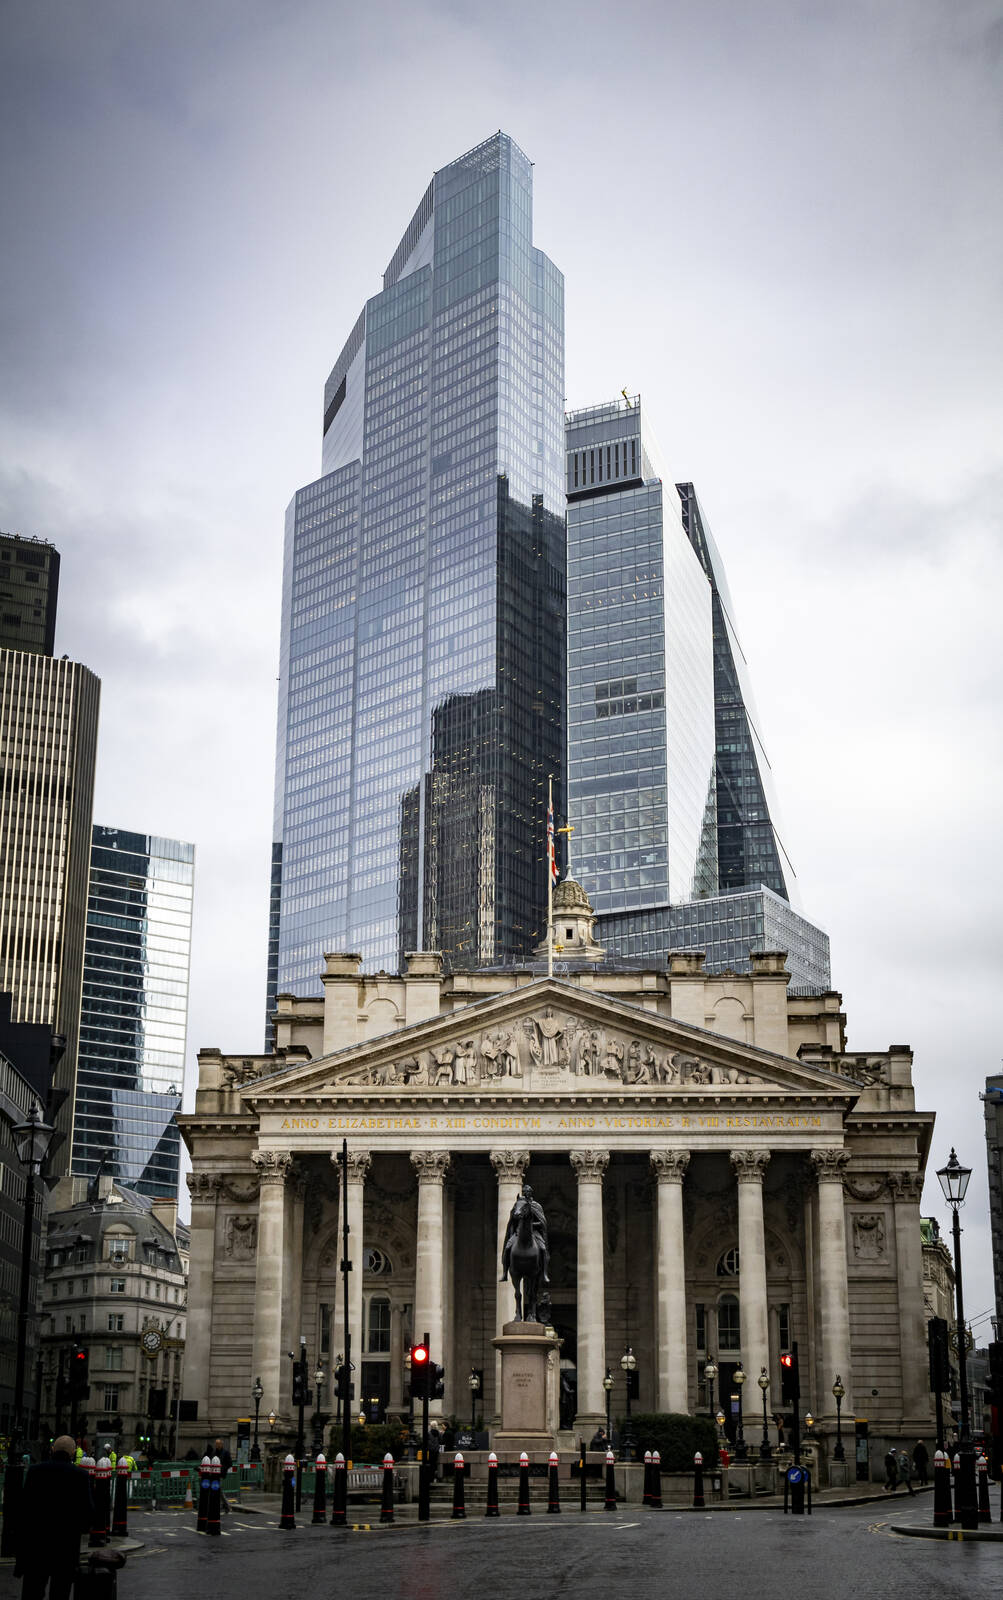 Image of Royal Exchange by Richard Joiner